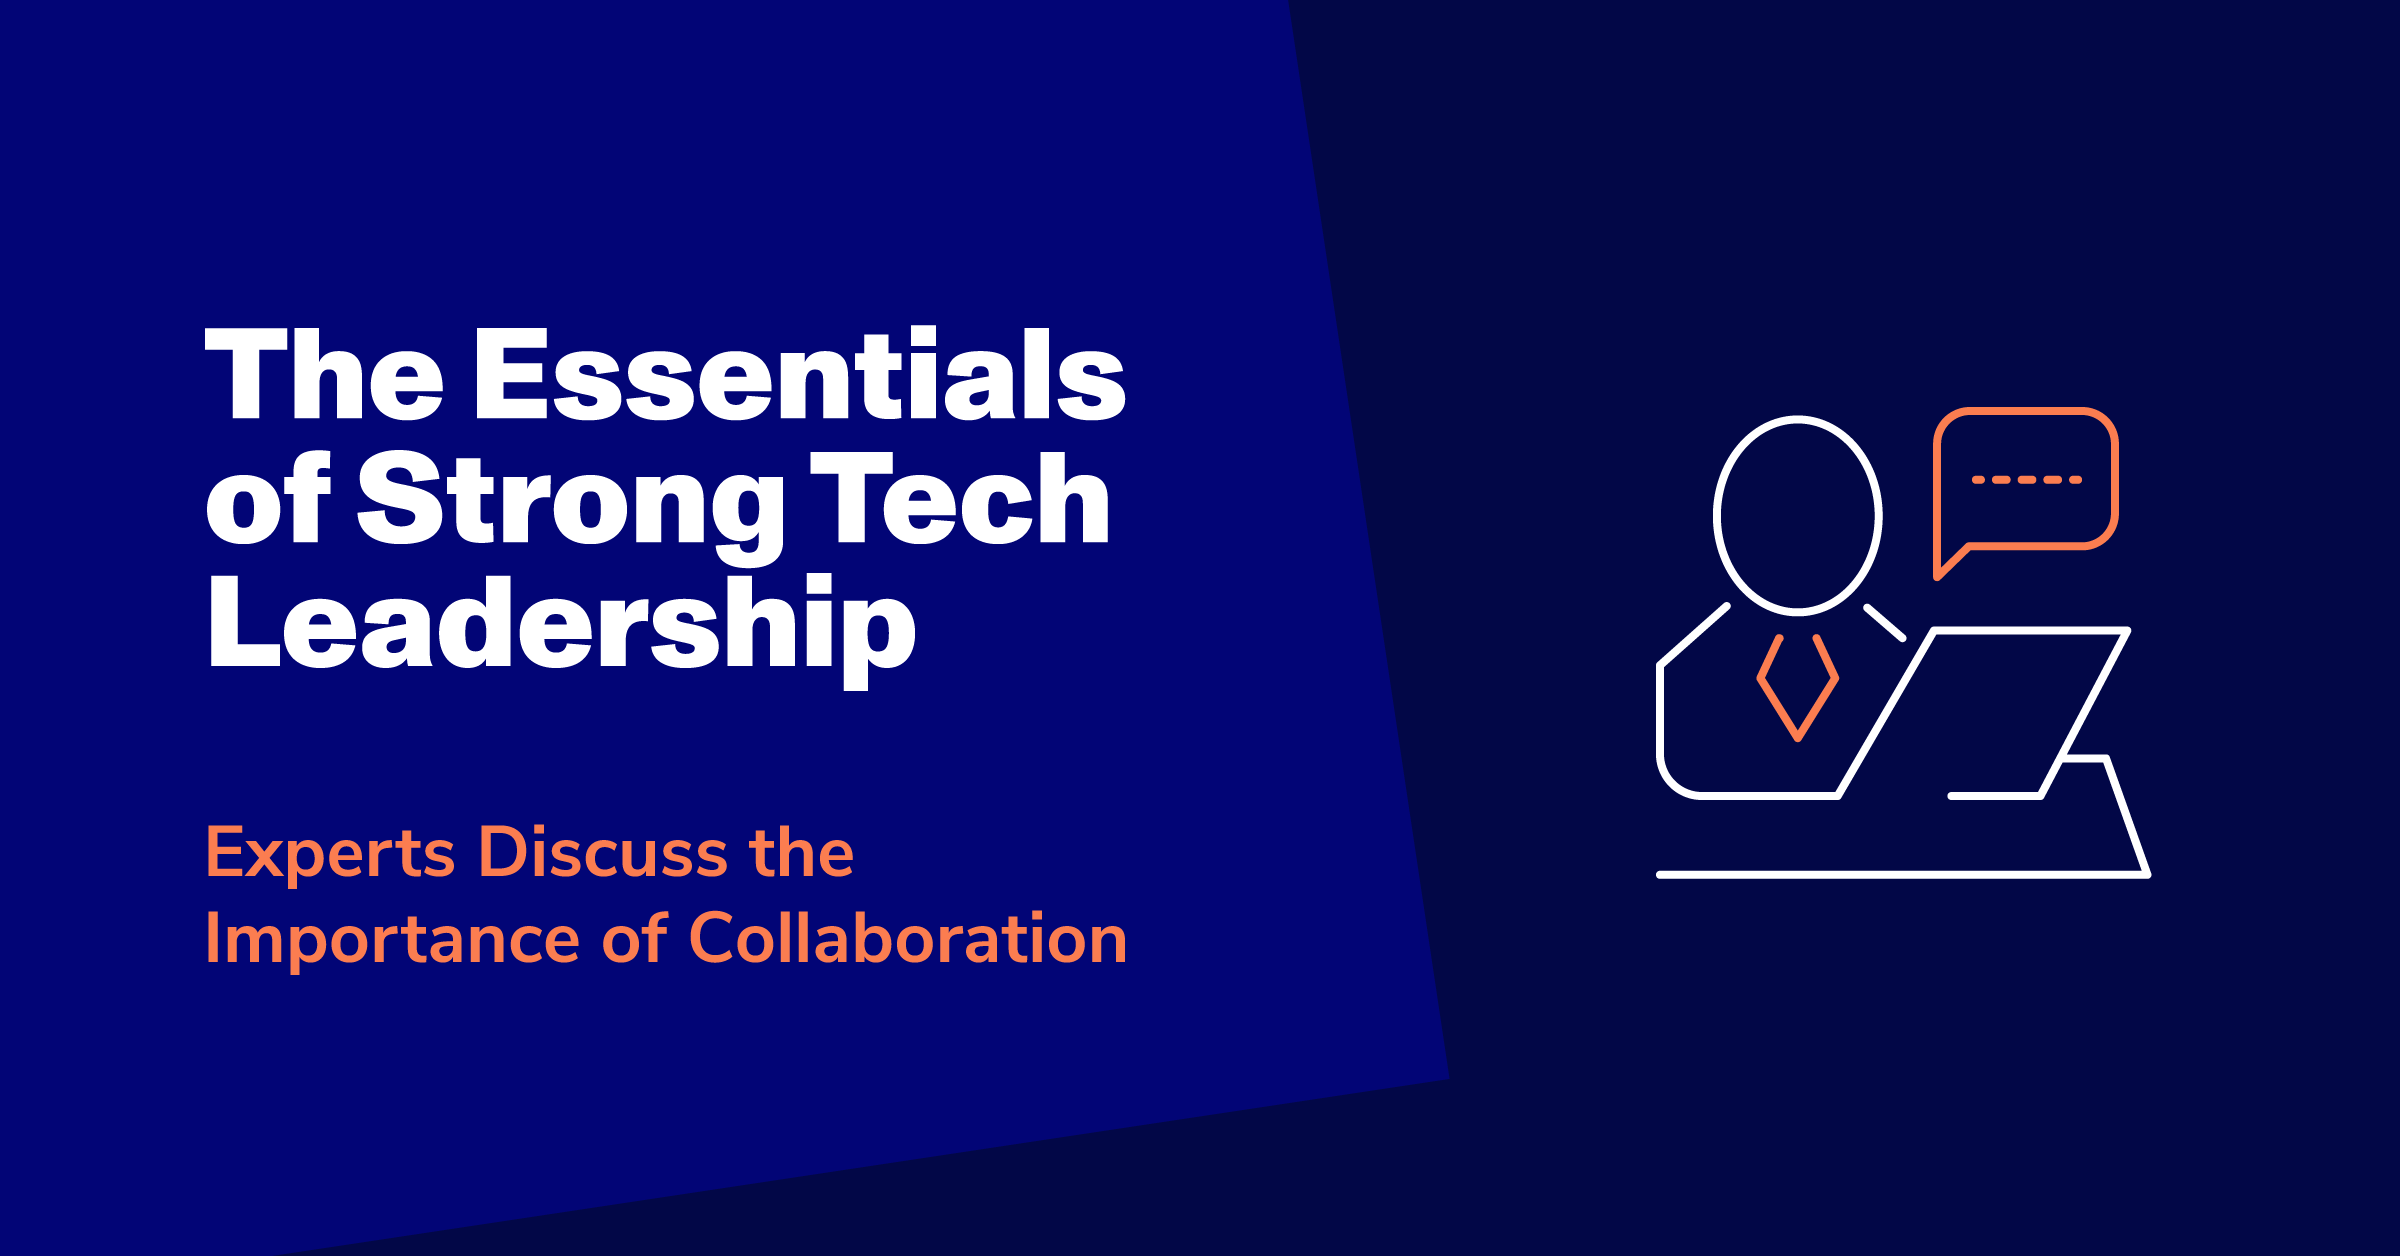 The Essentials of Strong Tech Leadership: Experts Discuss the Importance of Collaboration